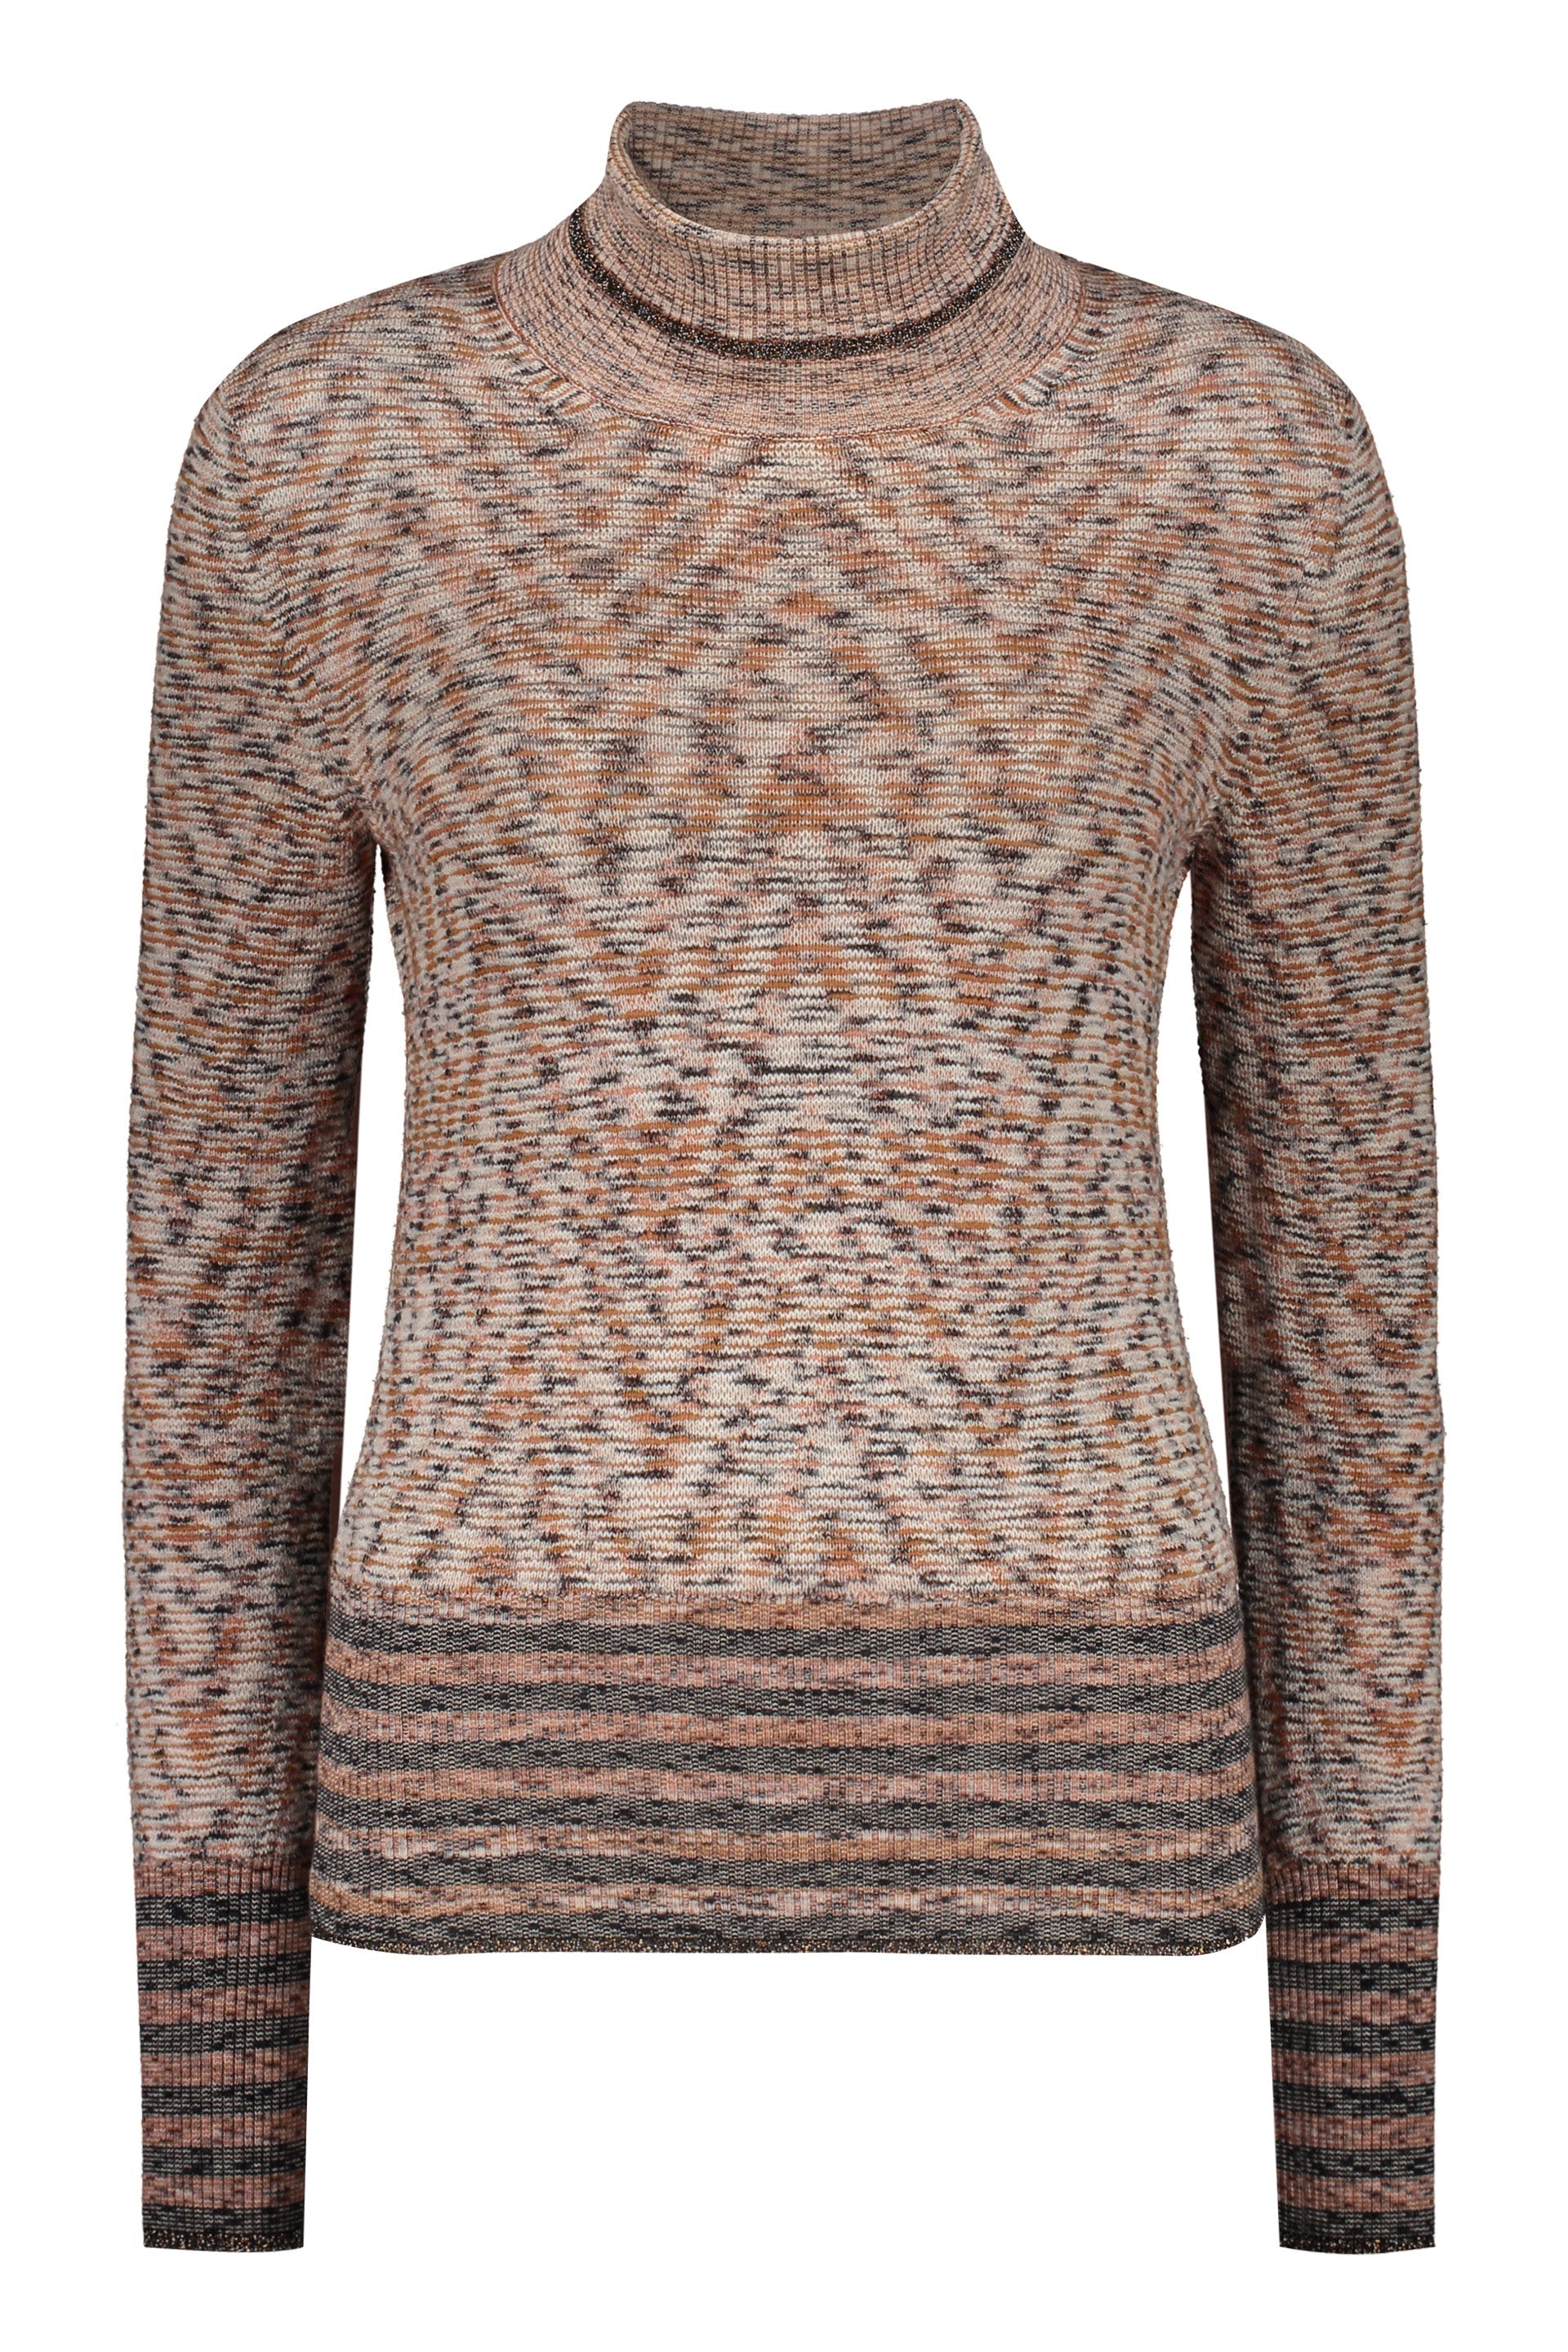 Missoni-OUTLET-SALE-Wool-turtleneck-sweater-Strick-40-ARCHIVE-COLLECTION.jpg